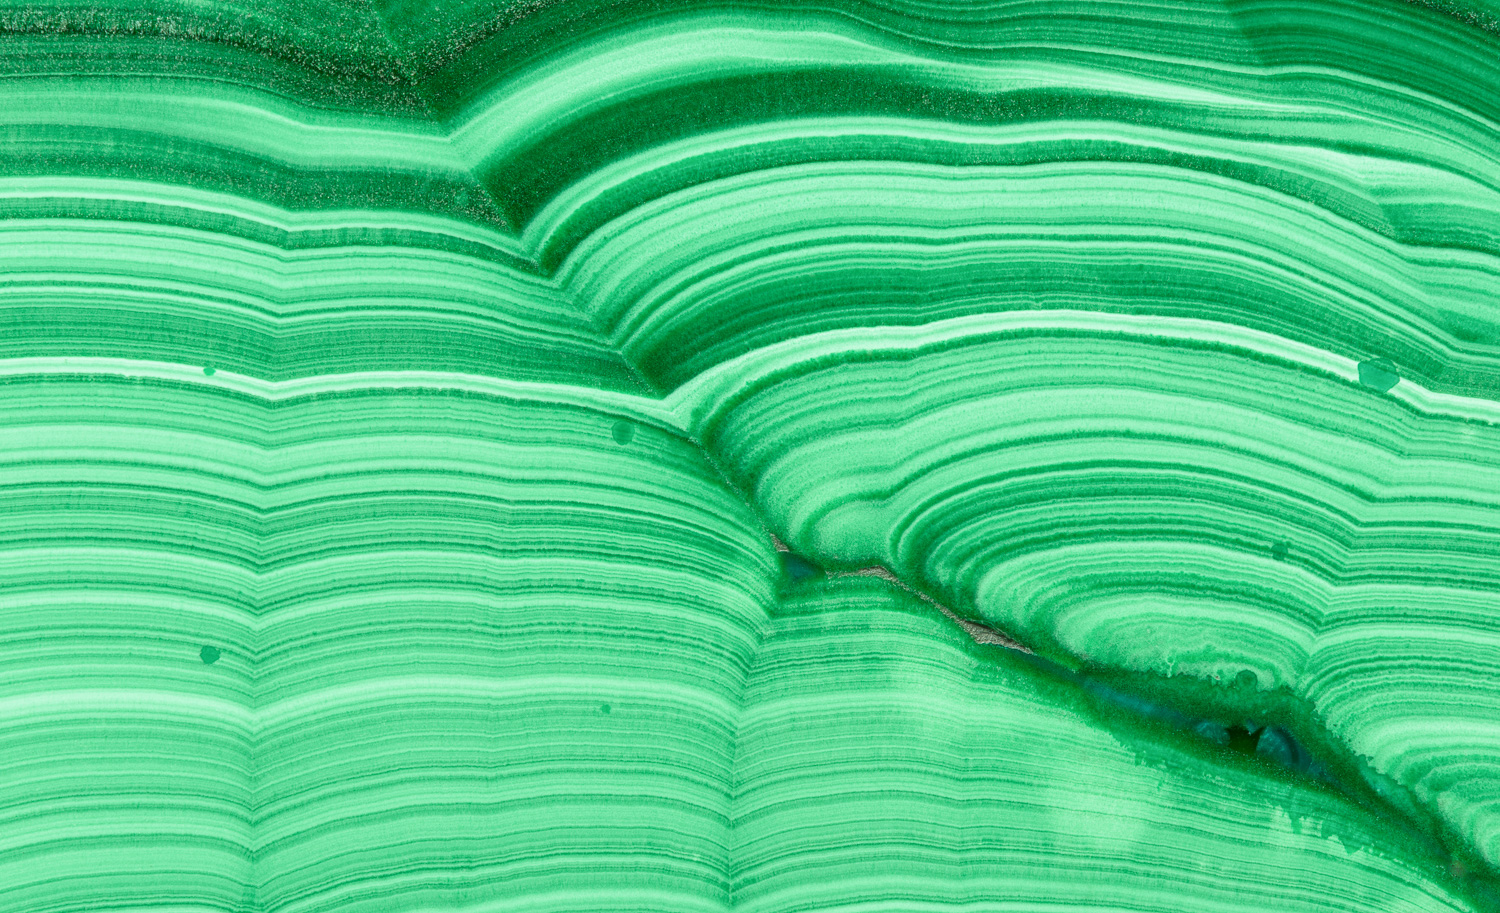 Macrophotograph of a cross-sectioned and polished malachite stalactite from the Democratic Republic of the Congo.  Malachite...